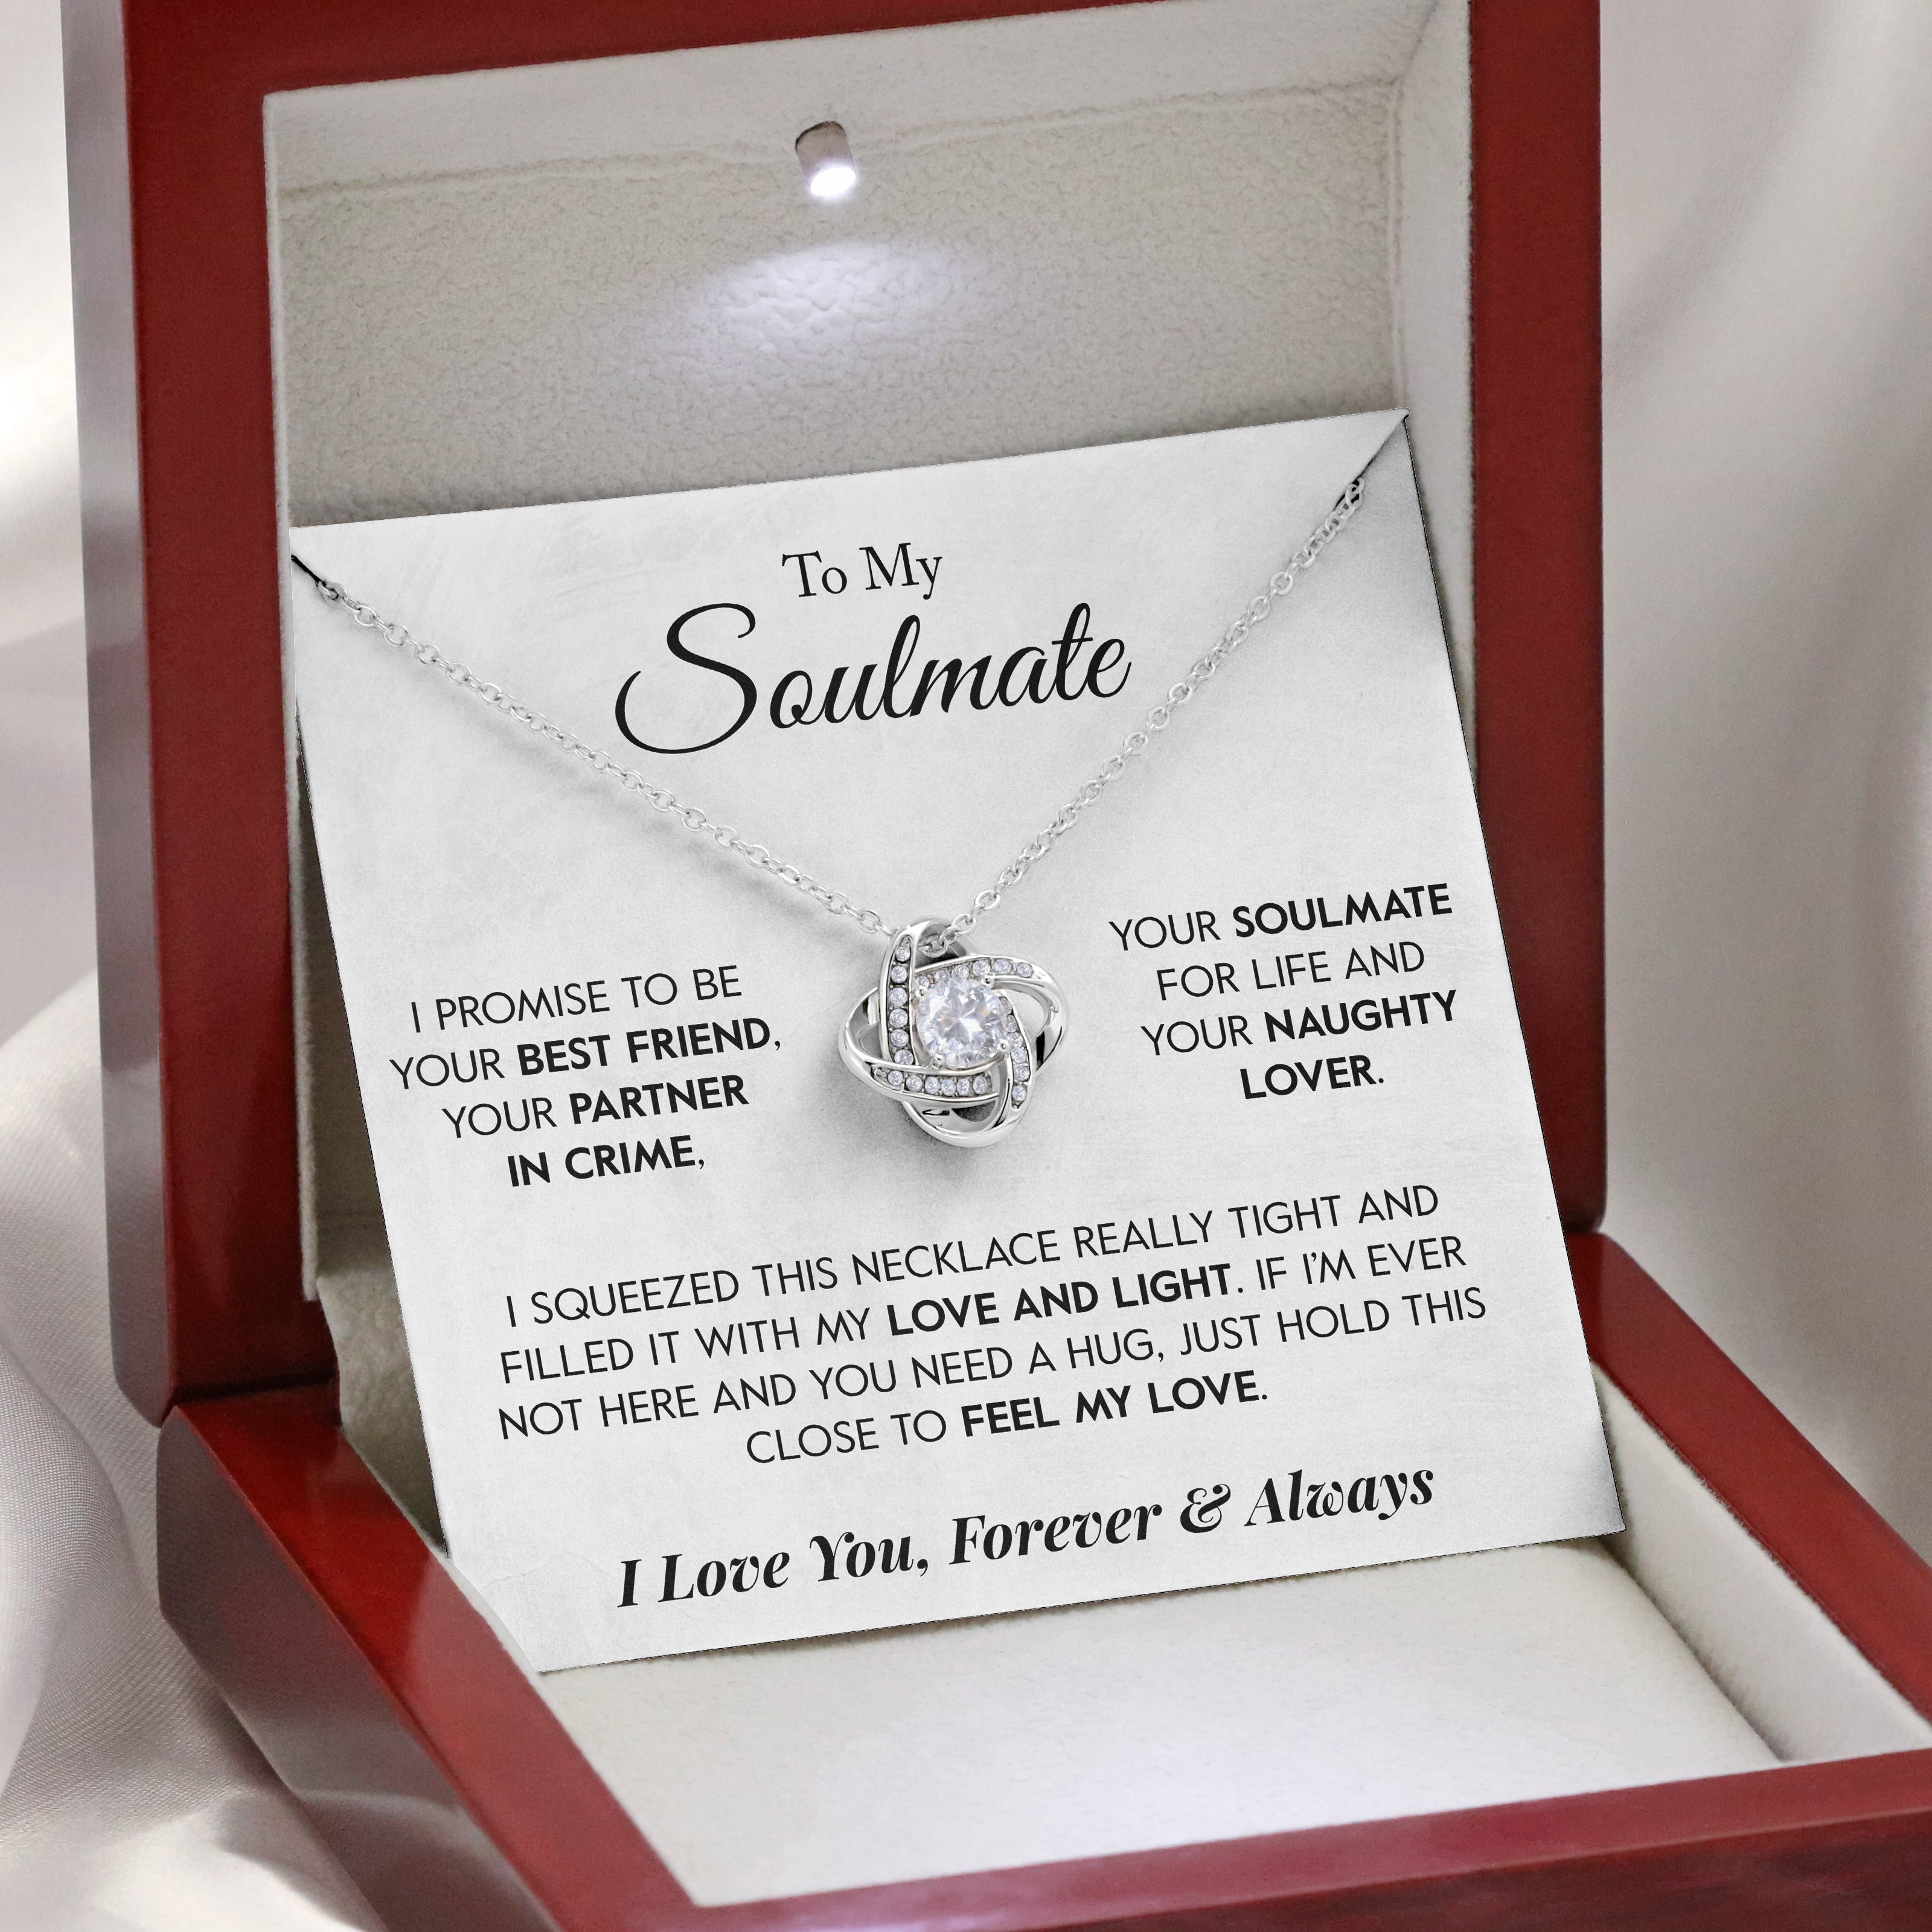 To My Soulmate | "Partner in Crime" | Love Knot Necklace